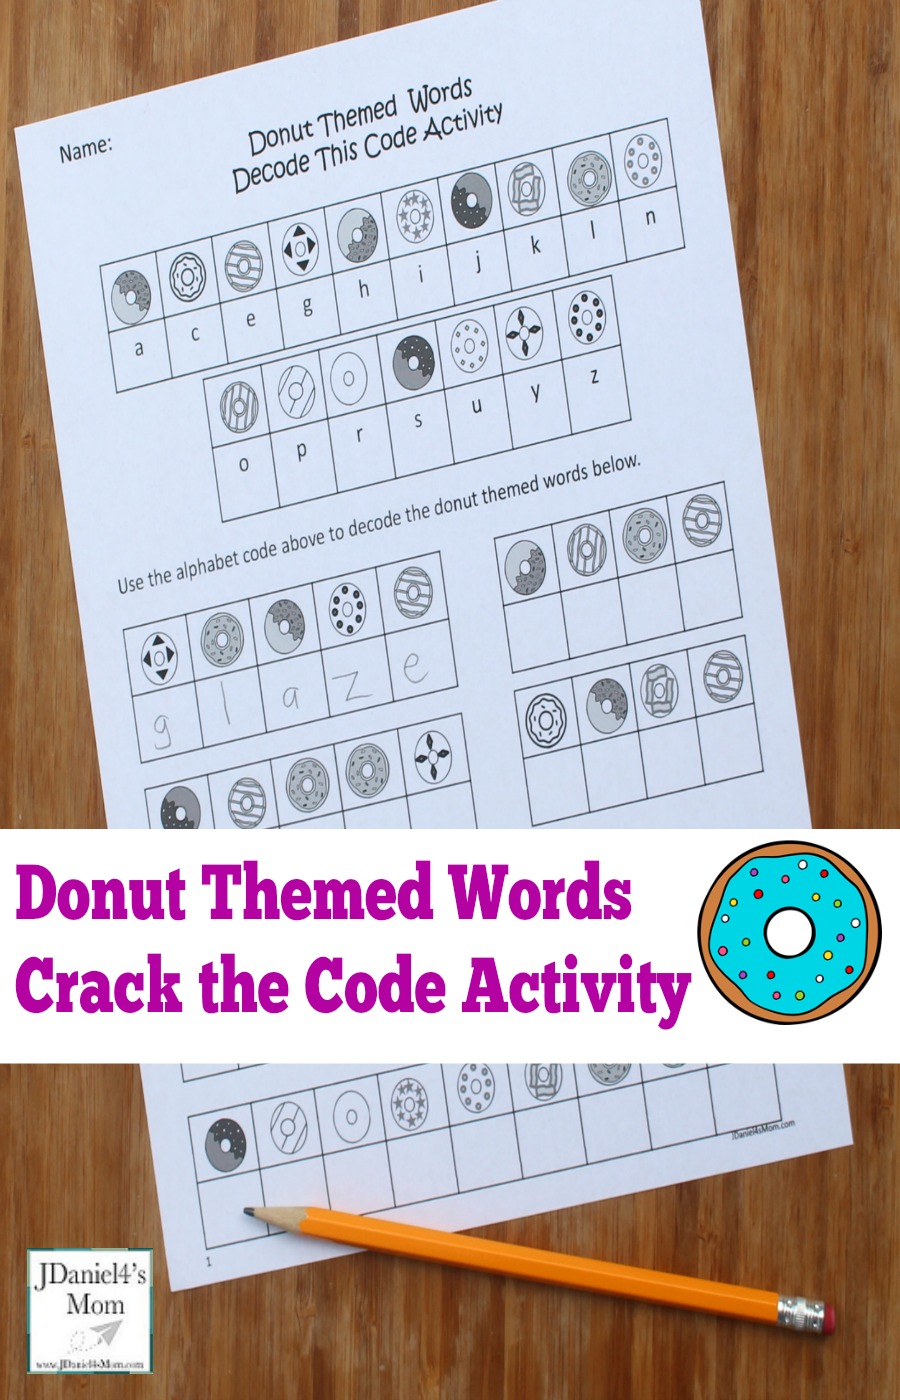 Your children will have fun cracking the code to decode these donut themed words. It would be a fun reading activity to explore on National Donut Day.